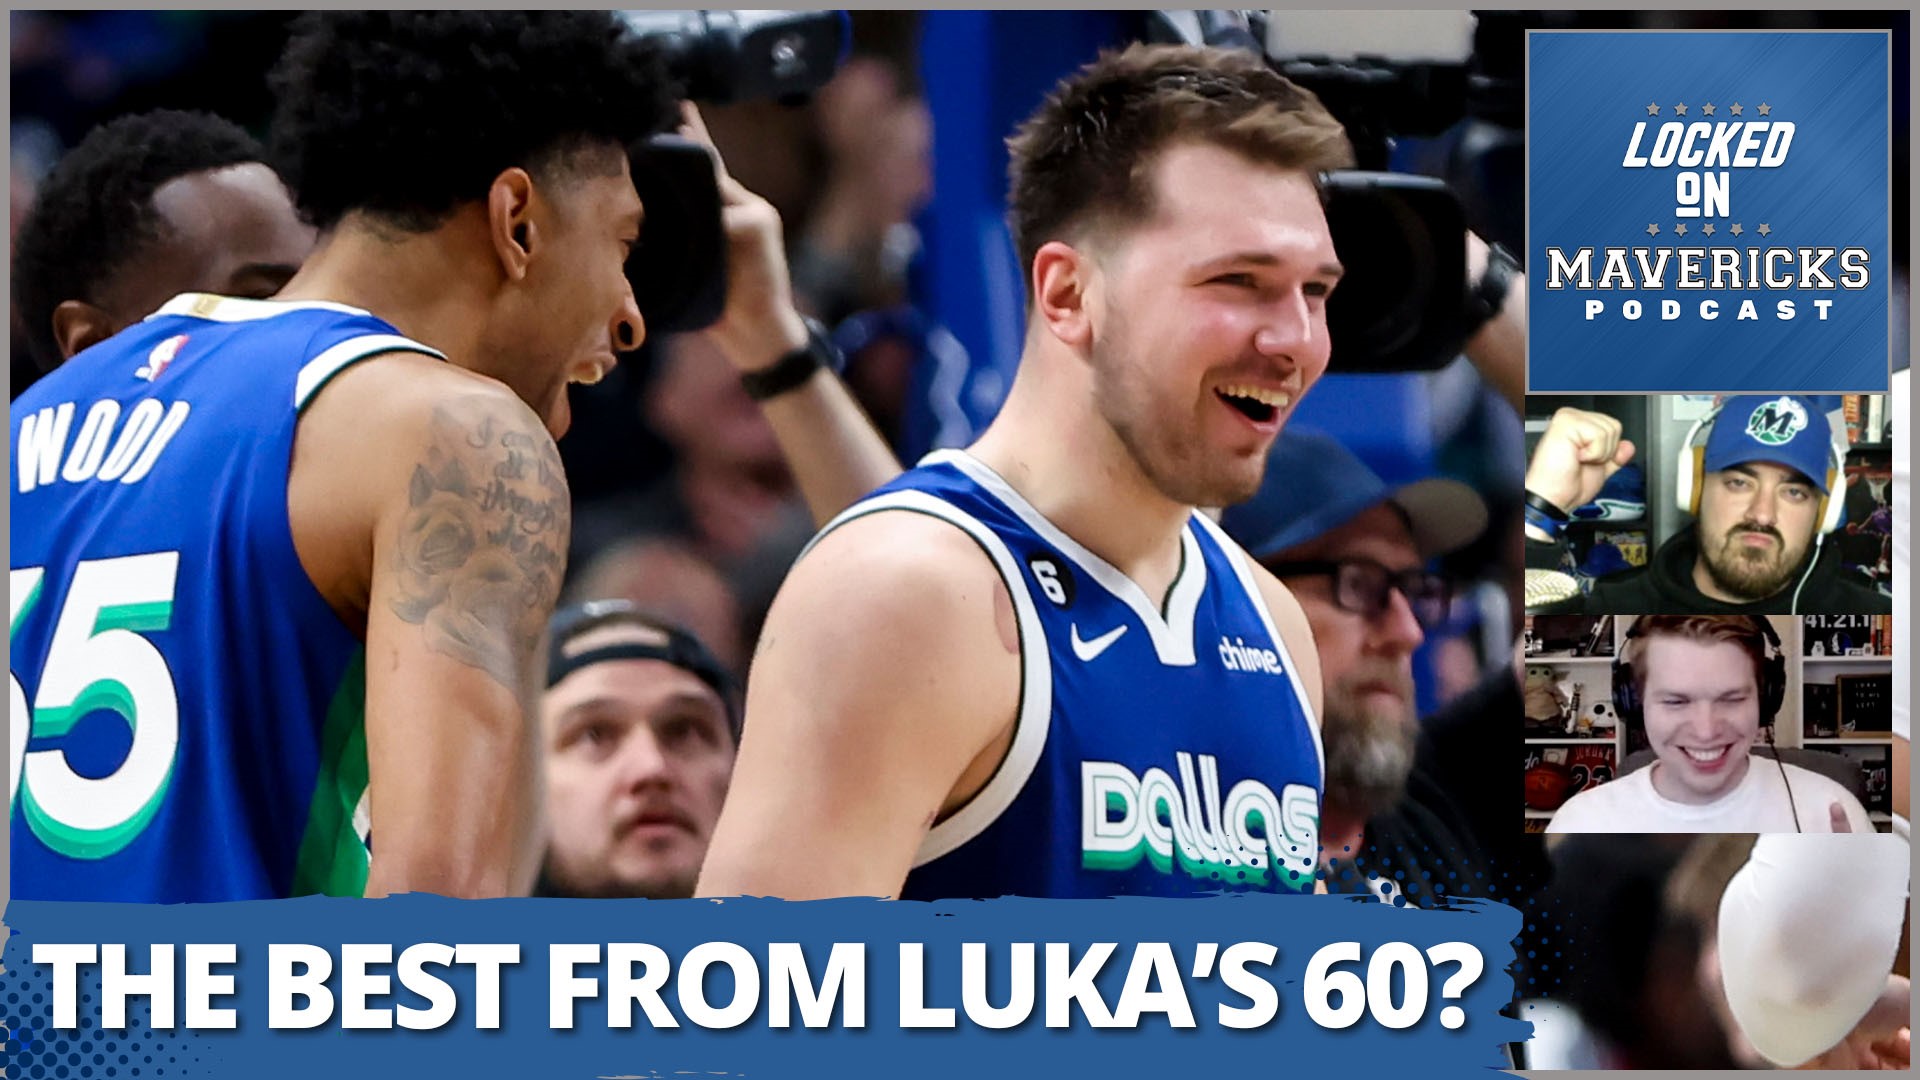 Nick Angstadt & Isaac Harris discuss the best moments from Luka Doncic's career night and the Mavs win over the Knicks.